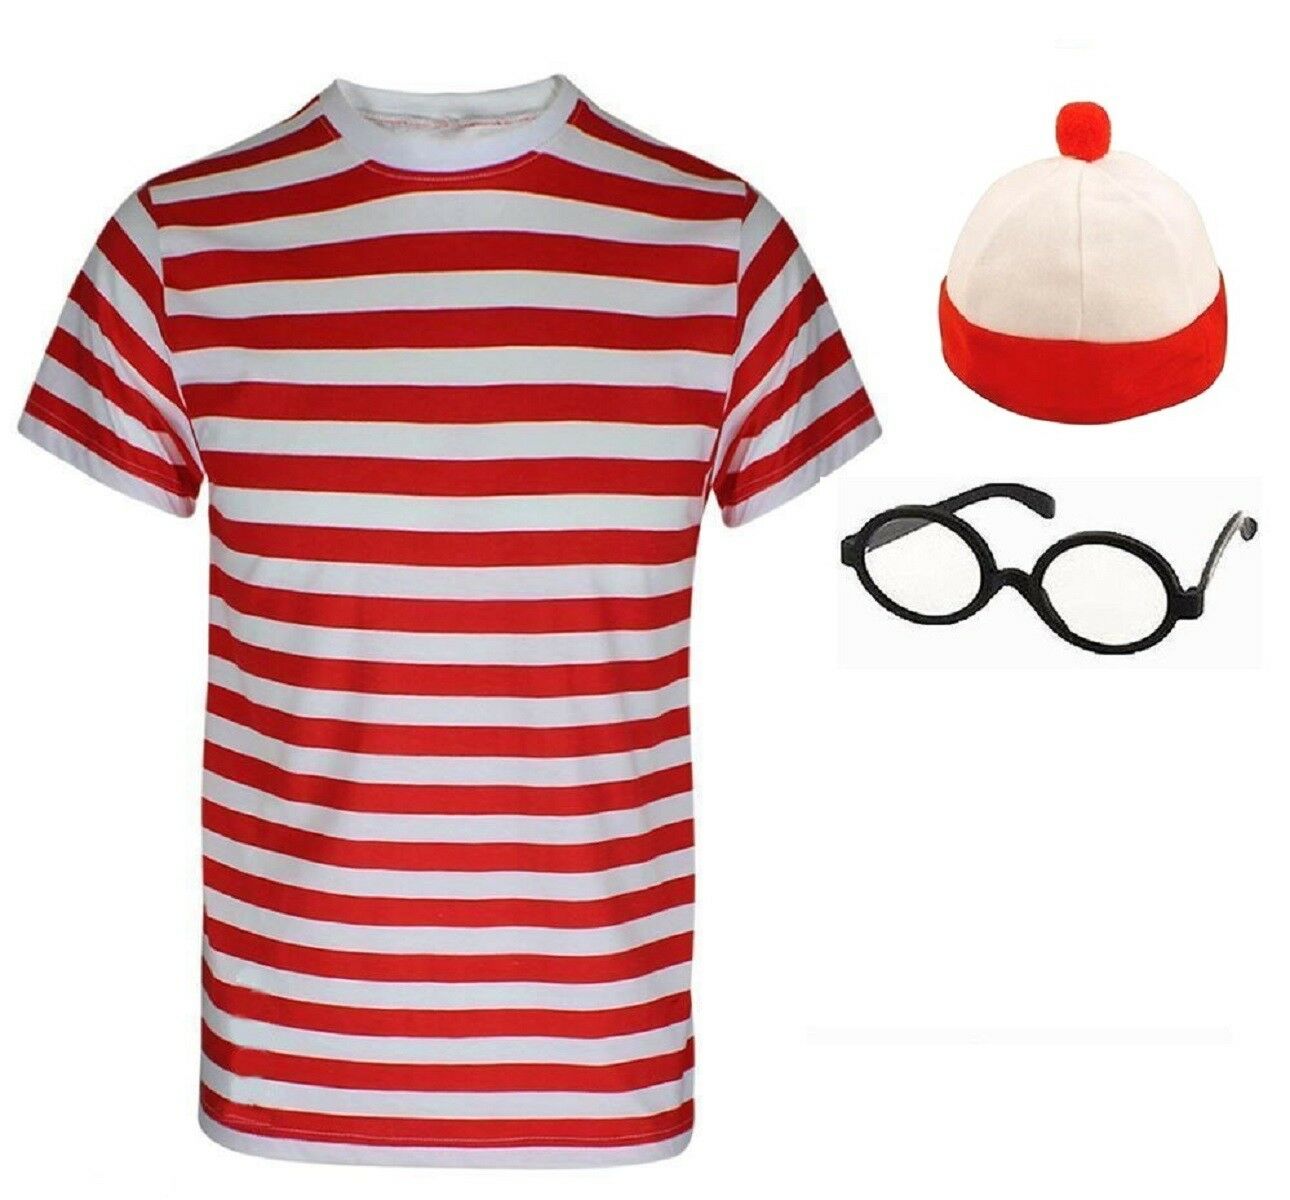 Children's "Where's Nerd" Costume. This Is perfect For World book Day Or Halloween & Fancy Dress parties. You will Receive The T-Shirt, Hat & Glasses. Available In Ages 5-13.